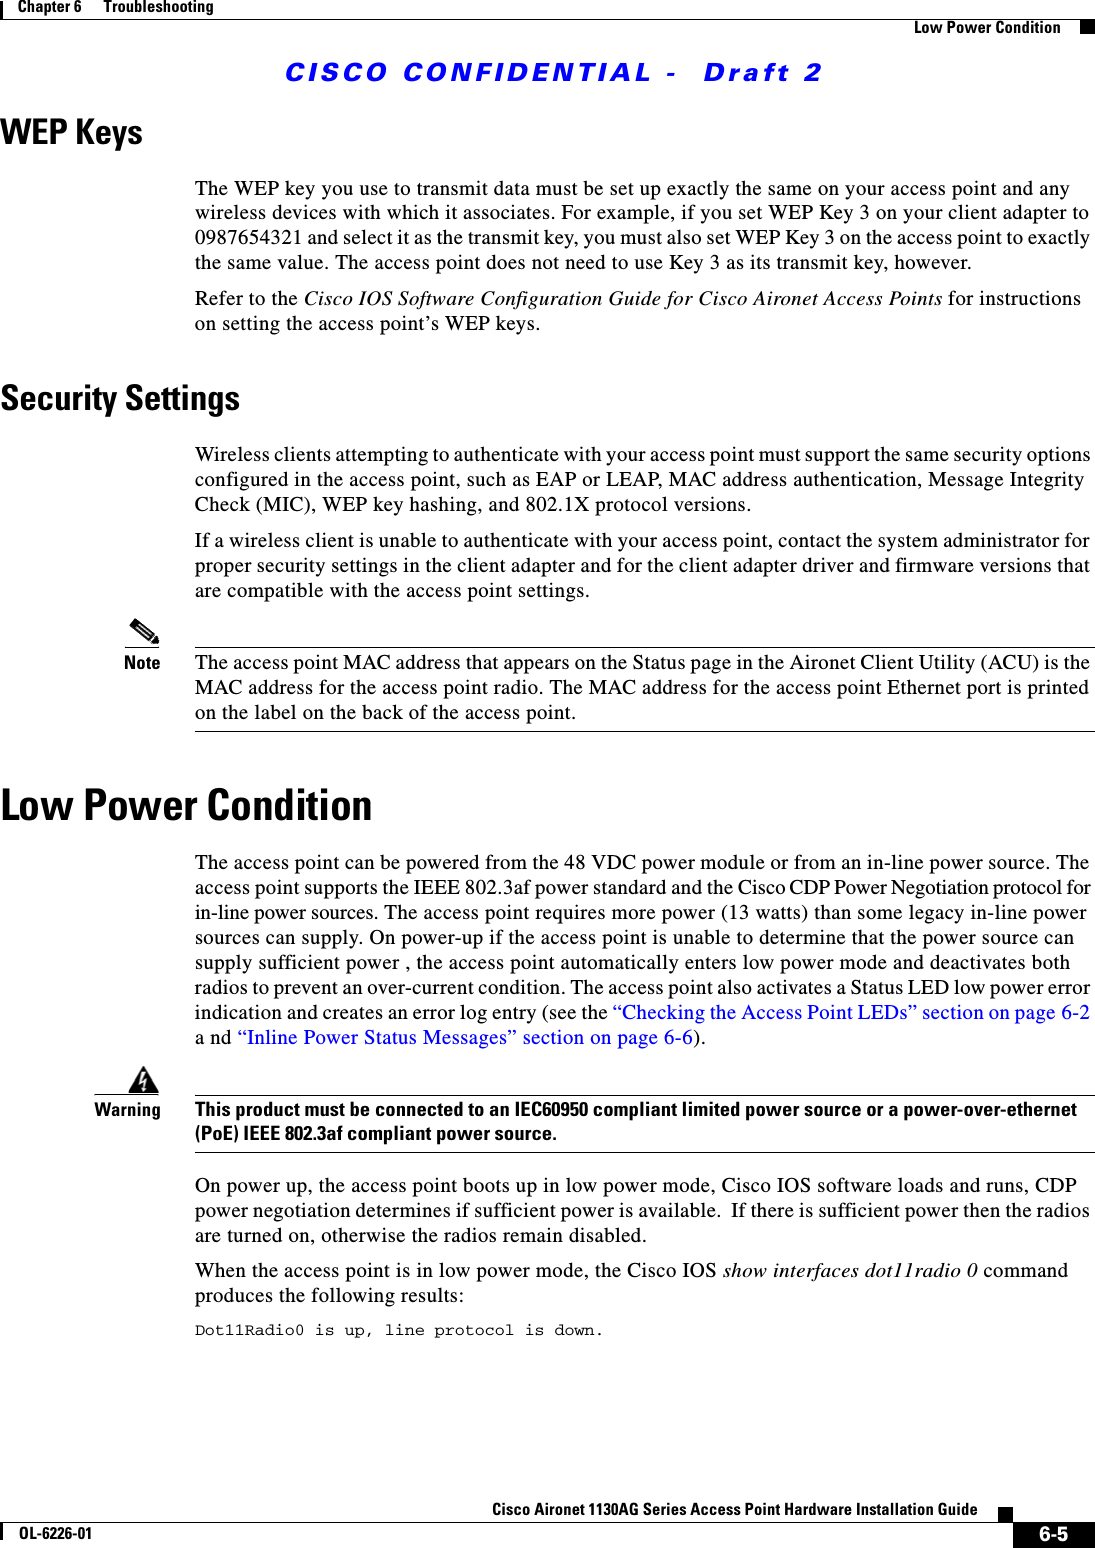  CISCO CONFIDENTIAL -  Draft 26-5Cisco Aironet 1130AG Series Access Point Hardware Installation GuideOL-6226-01Chapter 6      TroubleshootingLow Power ConditionWEP KeysThe WEP key you use to transmit data must be set up exactly the same on your access point and any wireless devices with which it associates. For example, if you set WEP Key 3 on your client adapter to 0987654321 and select it as the transmit key, you must also set WEP Key 3 on the access point to exactly the same value. The access point does not need to use Key 3 as its transmit key, however.Refer to the Cisco IOS Software Configuration Guide for Cisco Aironet Access Points for instructions on setting the access point’s WEP keys.Security SettingsWireless clients attempting to authenticate with your access point must support the same security options configured in the access point, such as EAP or LEAP, MAC address authentication, Message Integrity Check (MIC), WEP key hashing, and 802.1X protocol versions.If a wireless client is unable to authenticate with your access point, contact the system administrator for proper security settings in the client adapter and for the client adapter driver and firmware versions that are compatible with the access point settings.Note The access point MAC address that appears on the Status page in the Aironet Client Utility (ACU) is the MAC address for the access point radio. The MAC address for the access point Ethernet port is printed on the label on the back of the access point.Low Power ConditionThe access point can be powered from the 48 VDC power module or from an in-line power source. The access point supports the IEEE 802.3af power standard and the Cisco CDP Power Negotiation protocol for in-line power sources. The access point requires more power (13 watts) than some legacy in-line power sources can supply. On power-up if the access point is unable to determine that the power source can supply sufficient power , the access point automatically enters low power mode and deactivates both radios to prevent an over-current condition. The access point also activates a Status LED low power error indication and creates an error log entry (see the “Checking the Access Point LEDs” section on page 6-2 a nd “Inline Power Status Messages” section on page 6-6).WarningThis product must be connected to an IEC60950 compliant limited power source or a power-over-ethernet (PoE) IEEE 802.3af compliant power source. On power up, the access point boots up in low power mode, Cisco IOS software loads and runs, CDP power negotiation determines if sufficient power is available.  If there is sufficient power then the radios are turned on, otherwise the radios remain disabled.When the access point is in low power mode, the Cisco IOS show interfaces dot11radio 0 command produces the following results:Dot11Radio0 is up, line protocol is down.